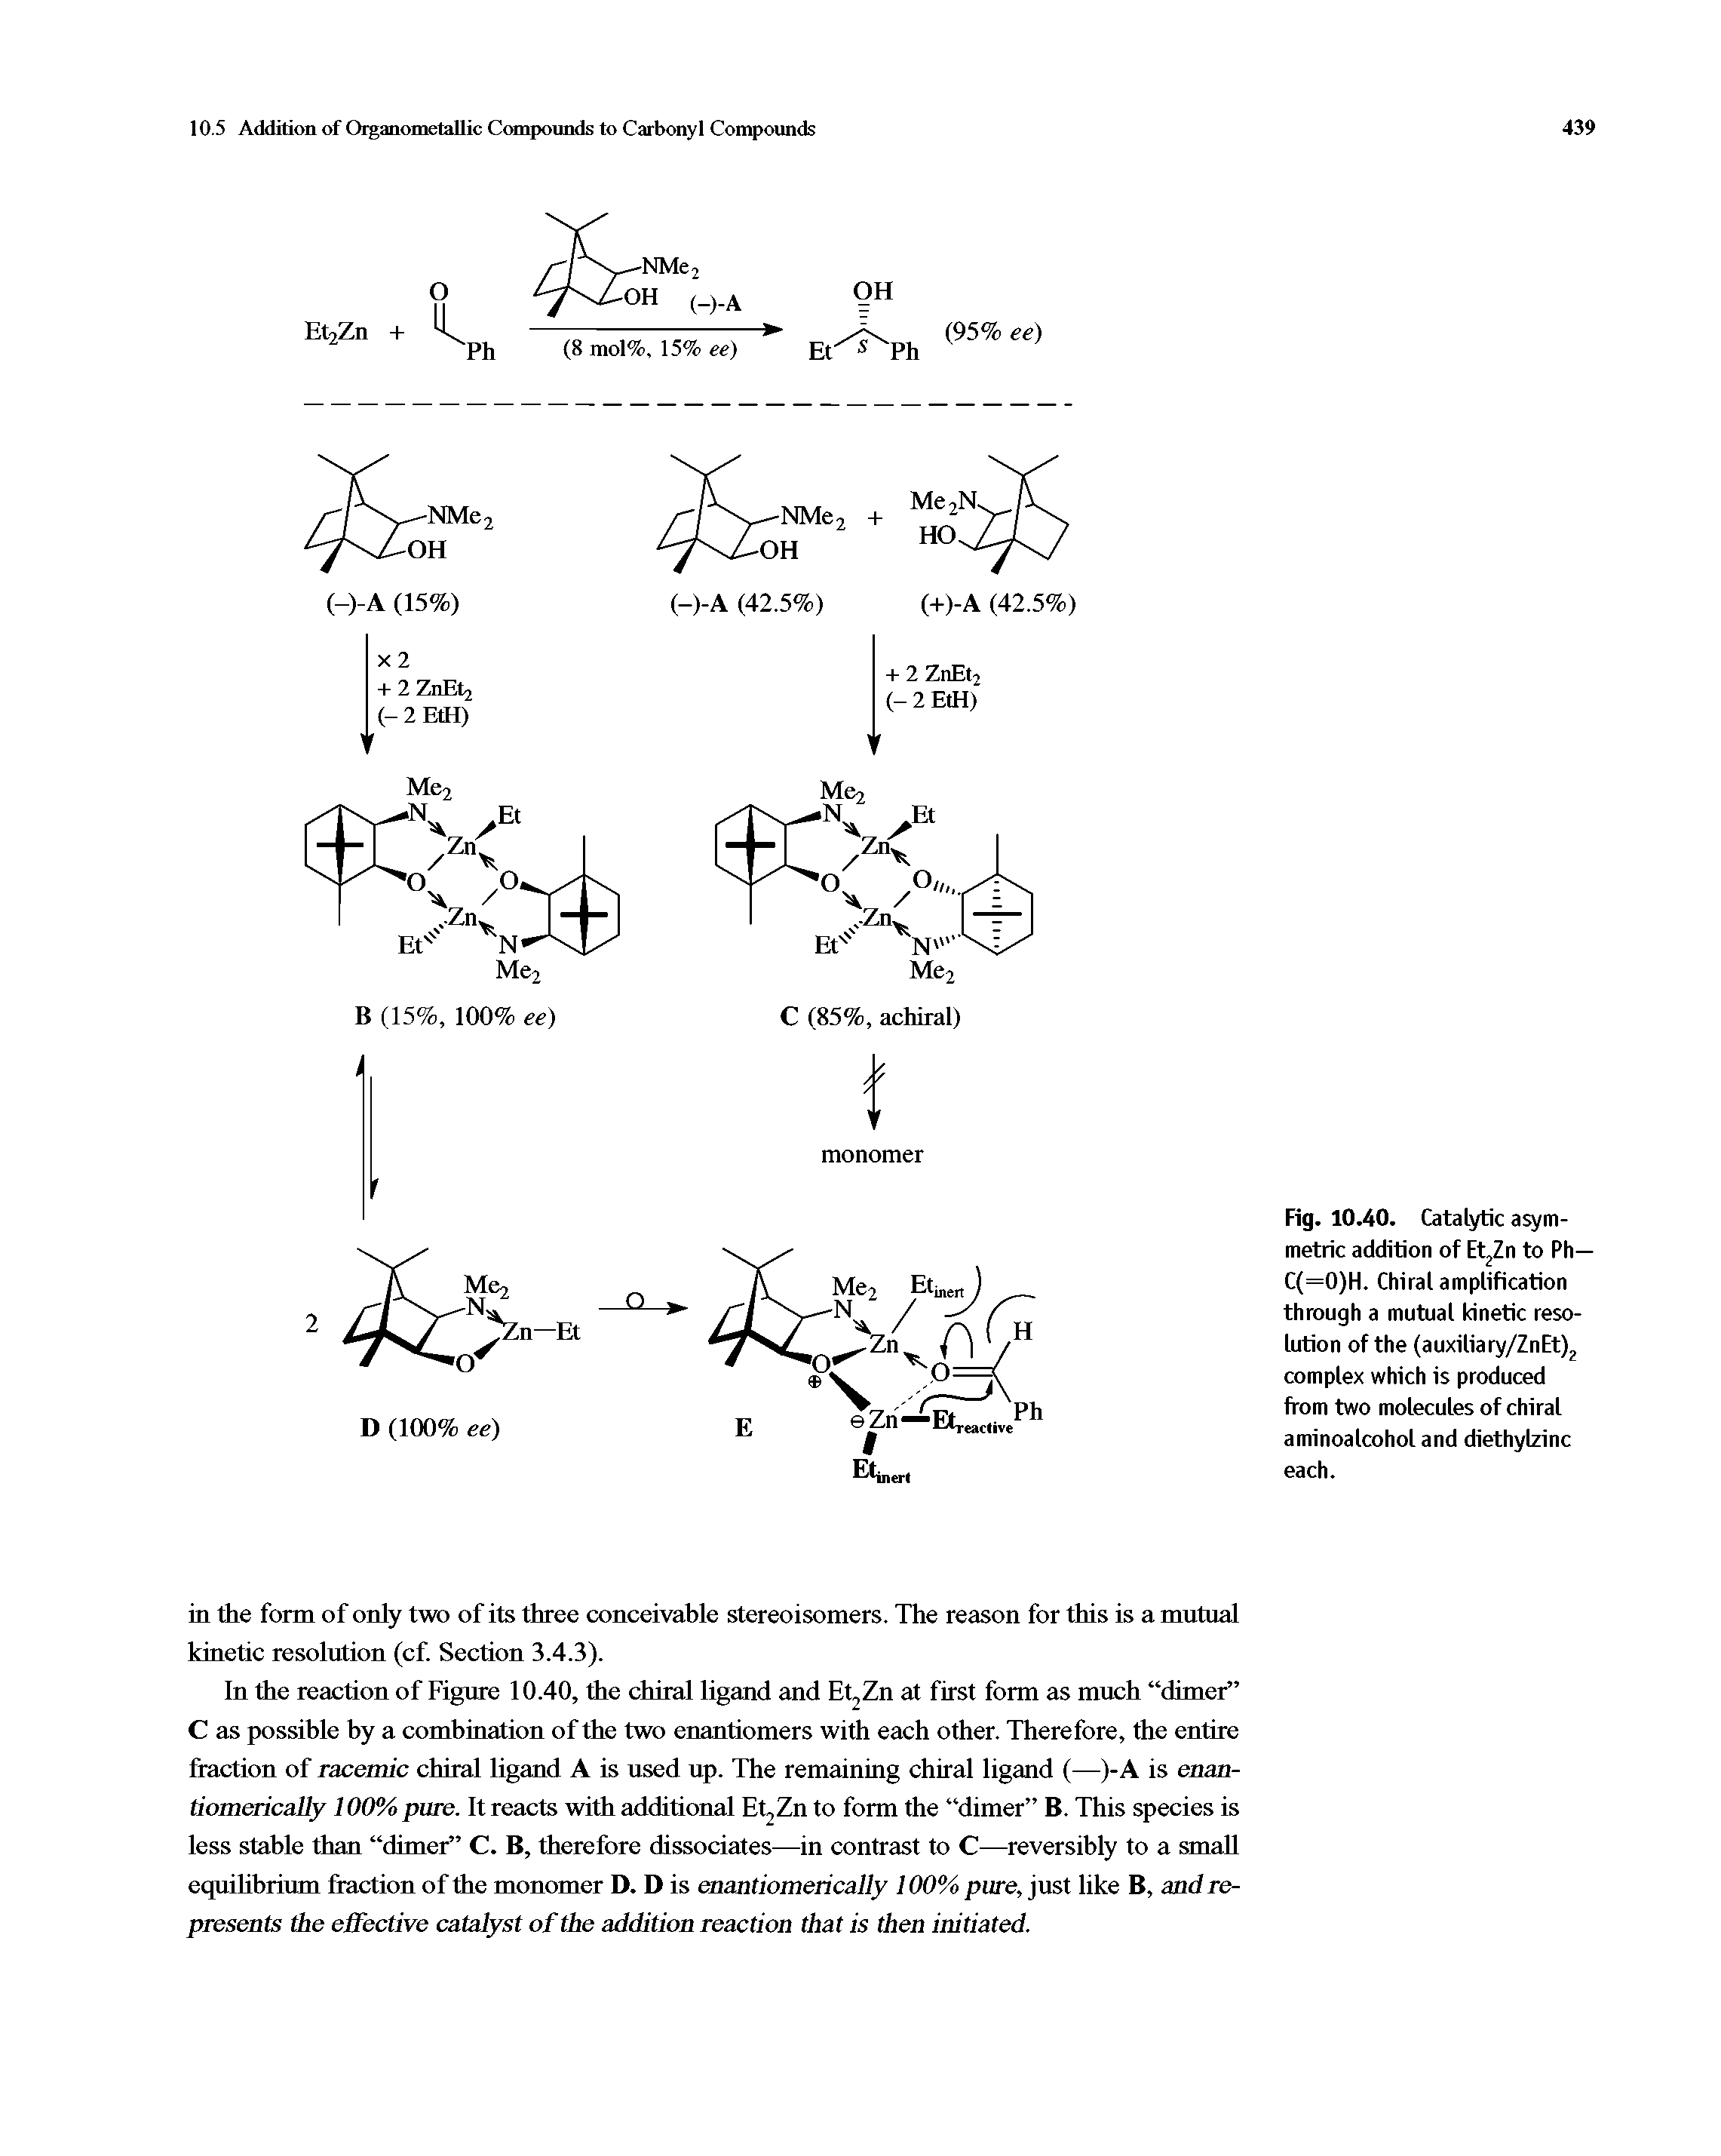 Fig. 10.40. Catalytic asymmetric addition of Et2Zn to Ph— C(=0)H. Chiral amplification through a mutual kinetic resolution of the (auxiliary/ZnEt)2 complex which is produced from two molecules of chiral aminoalcohol and diethylzinc each.